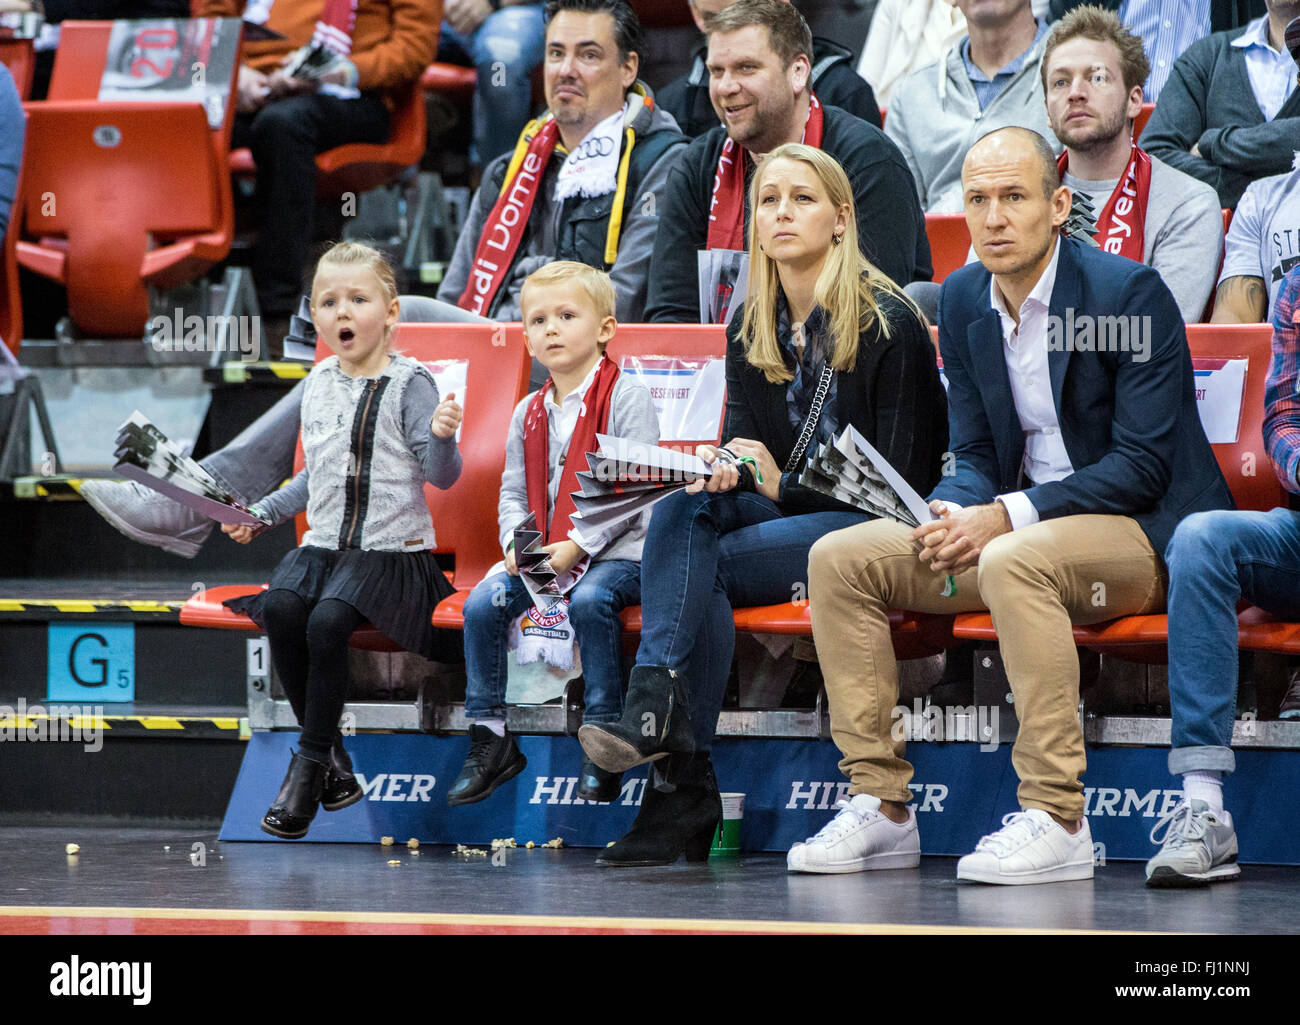 Munich, Germany. 28th Feb, 2016. FC Bayern Munich soccer player Arjen Robben, his wife Bernadien Eillert and two of their children sit in the stands at the German Bundesliga basketball game between Bayern Munich and ALBA Berlin in the Audi Dome in Munich, Germany, 28 February 2016. Photo: MARC MUELLER/dpa/Alamy Live News Stock Photo